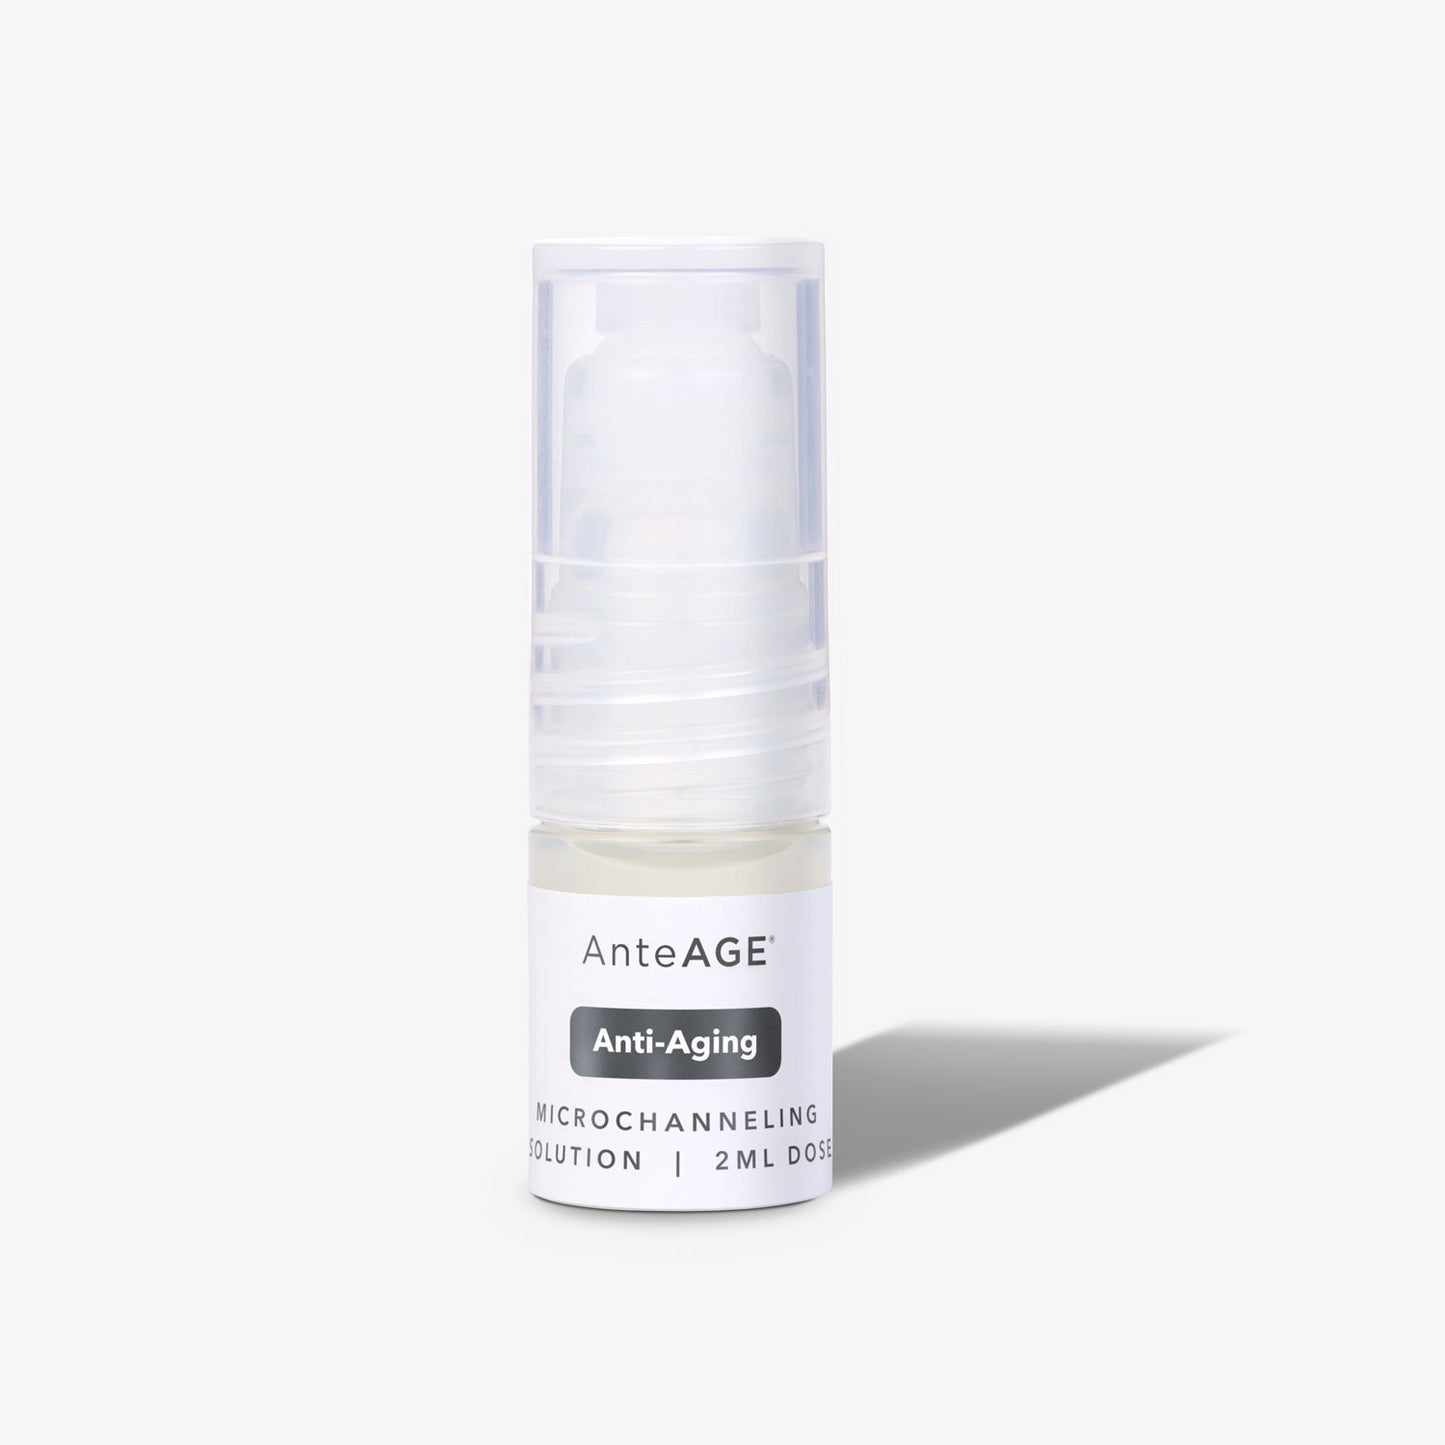 Load image into Gallery viewer, AnteAGE Microchanneling Vial | Bev Sidders Skincare
